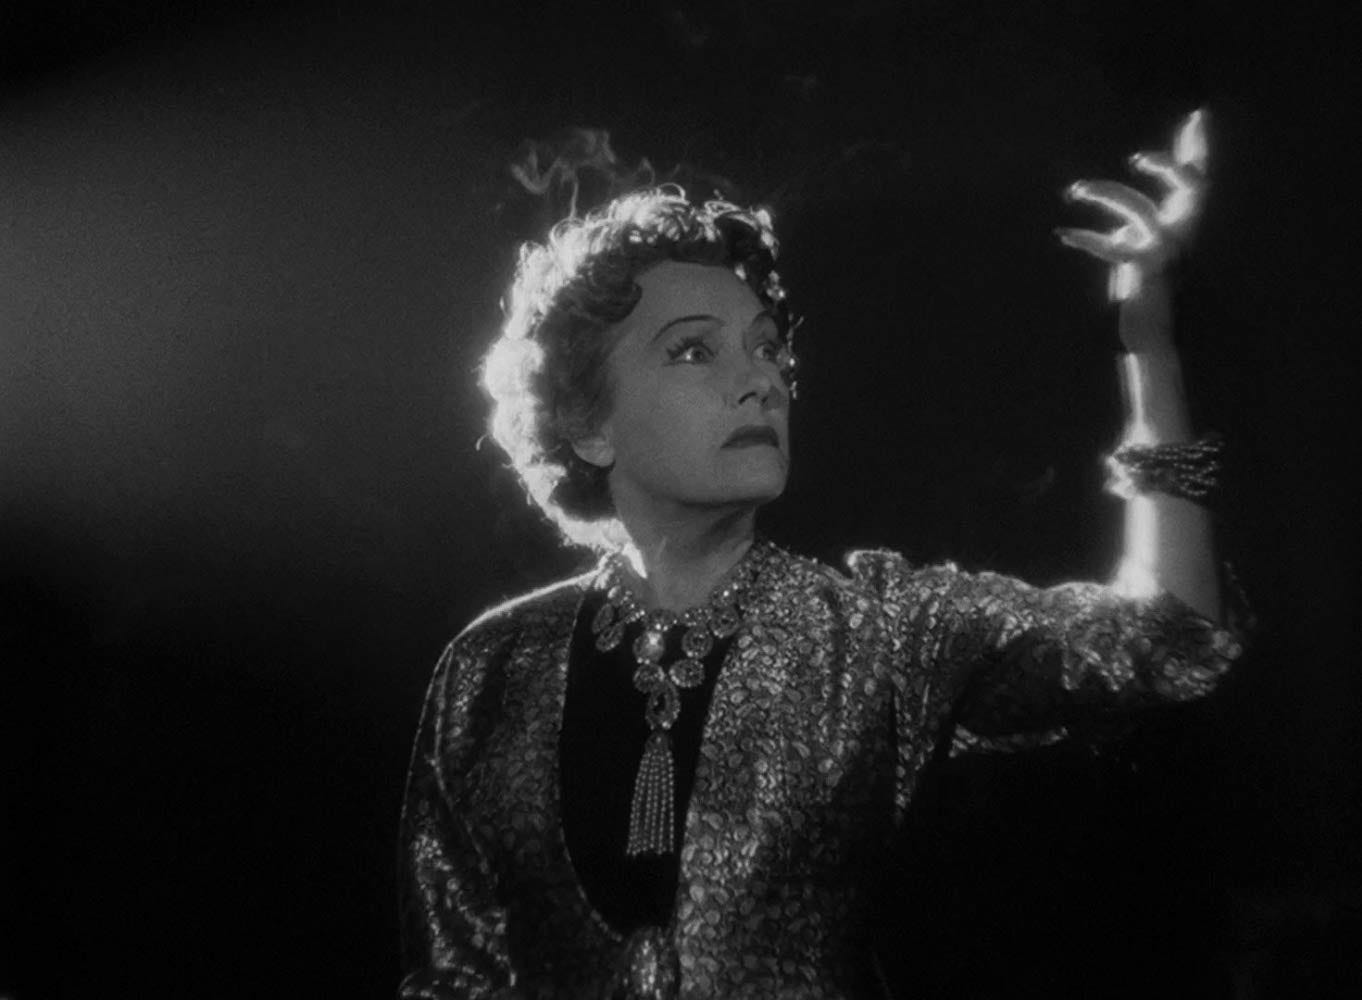 Norma Desmond in Sunset Boulevard standing in her screening room, lit by the projector, holding her hand up like talons.